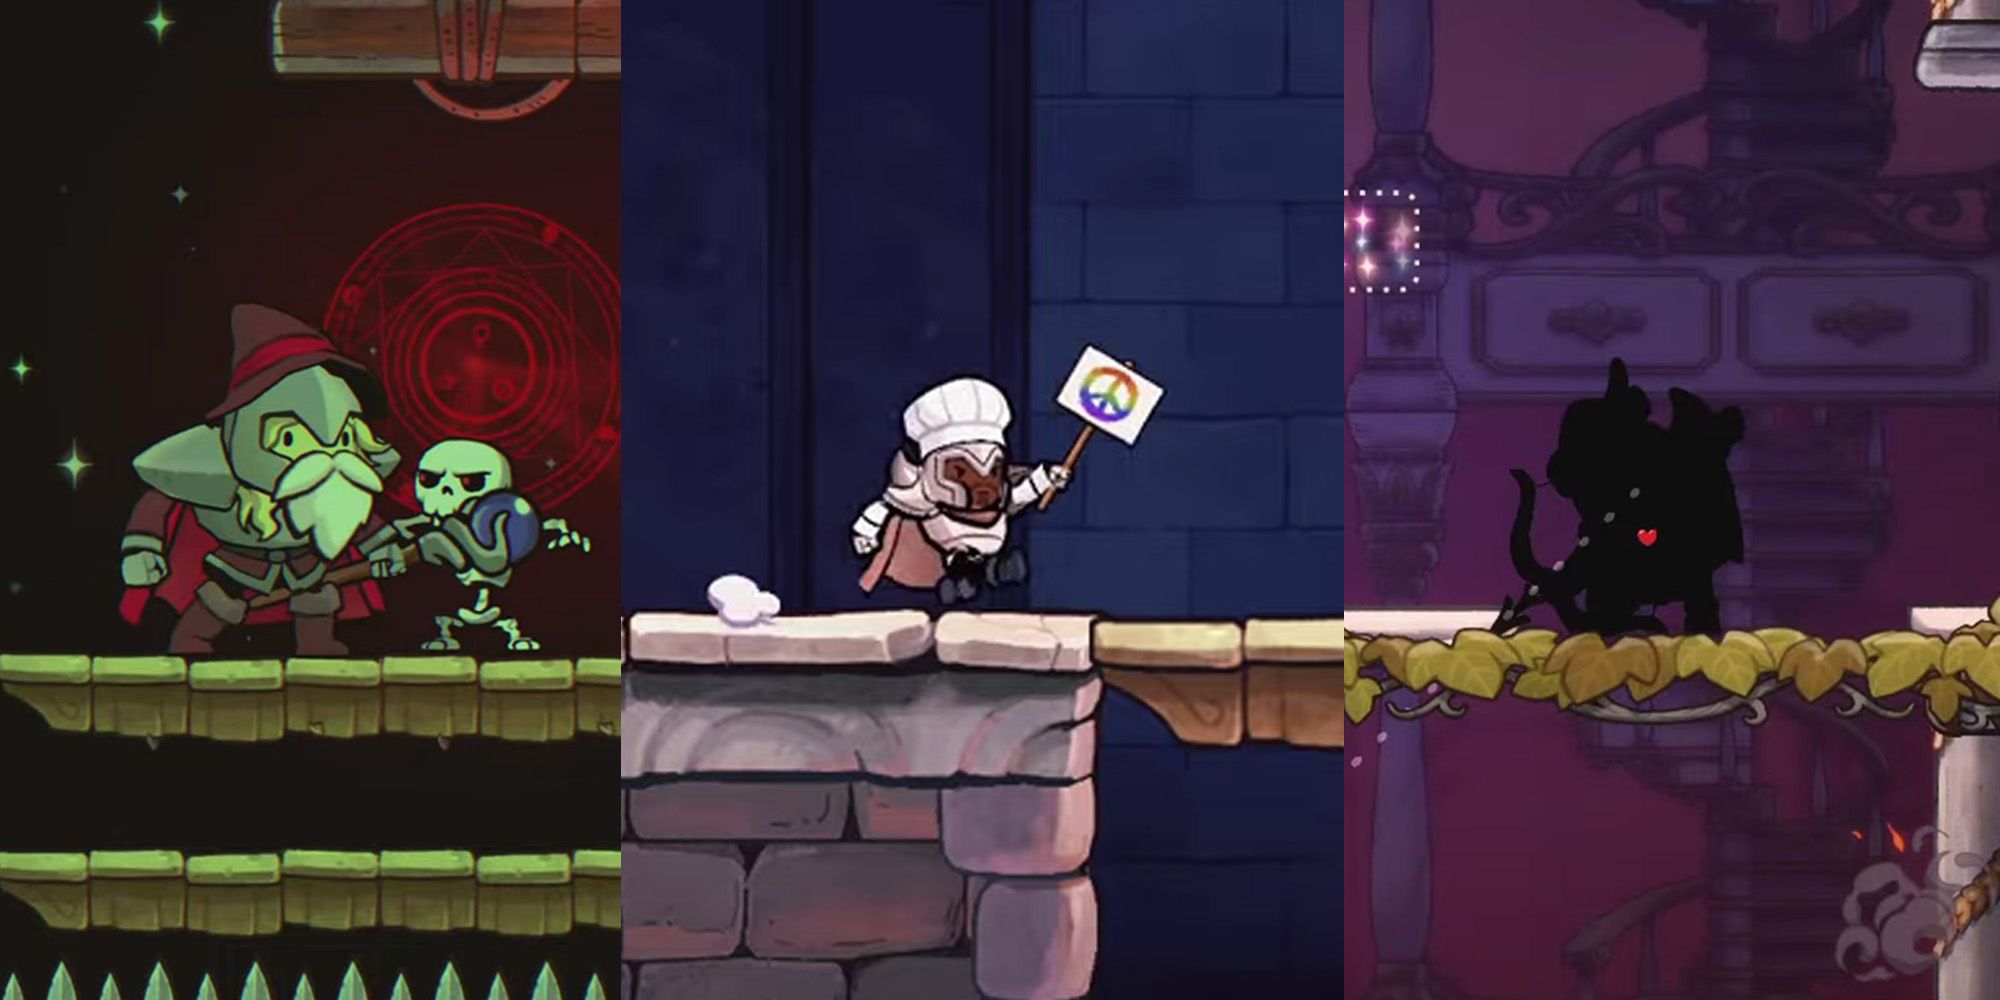 Rogue Legacy 2 screenshots of a Mage with the Gigantism trait, a Chef with the Pacifist trait, and a Ranger with the Disattuned trait